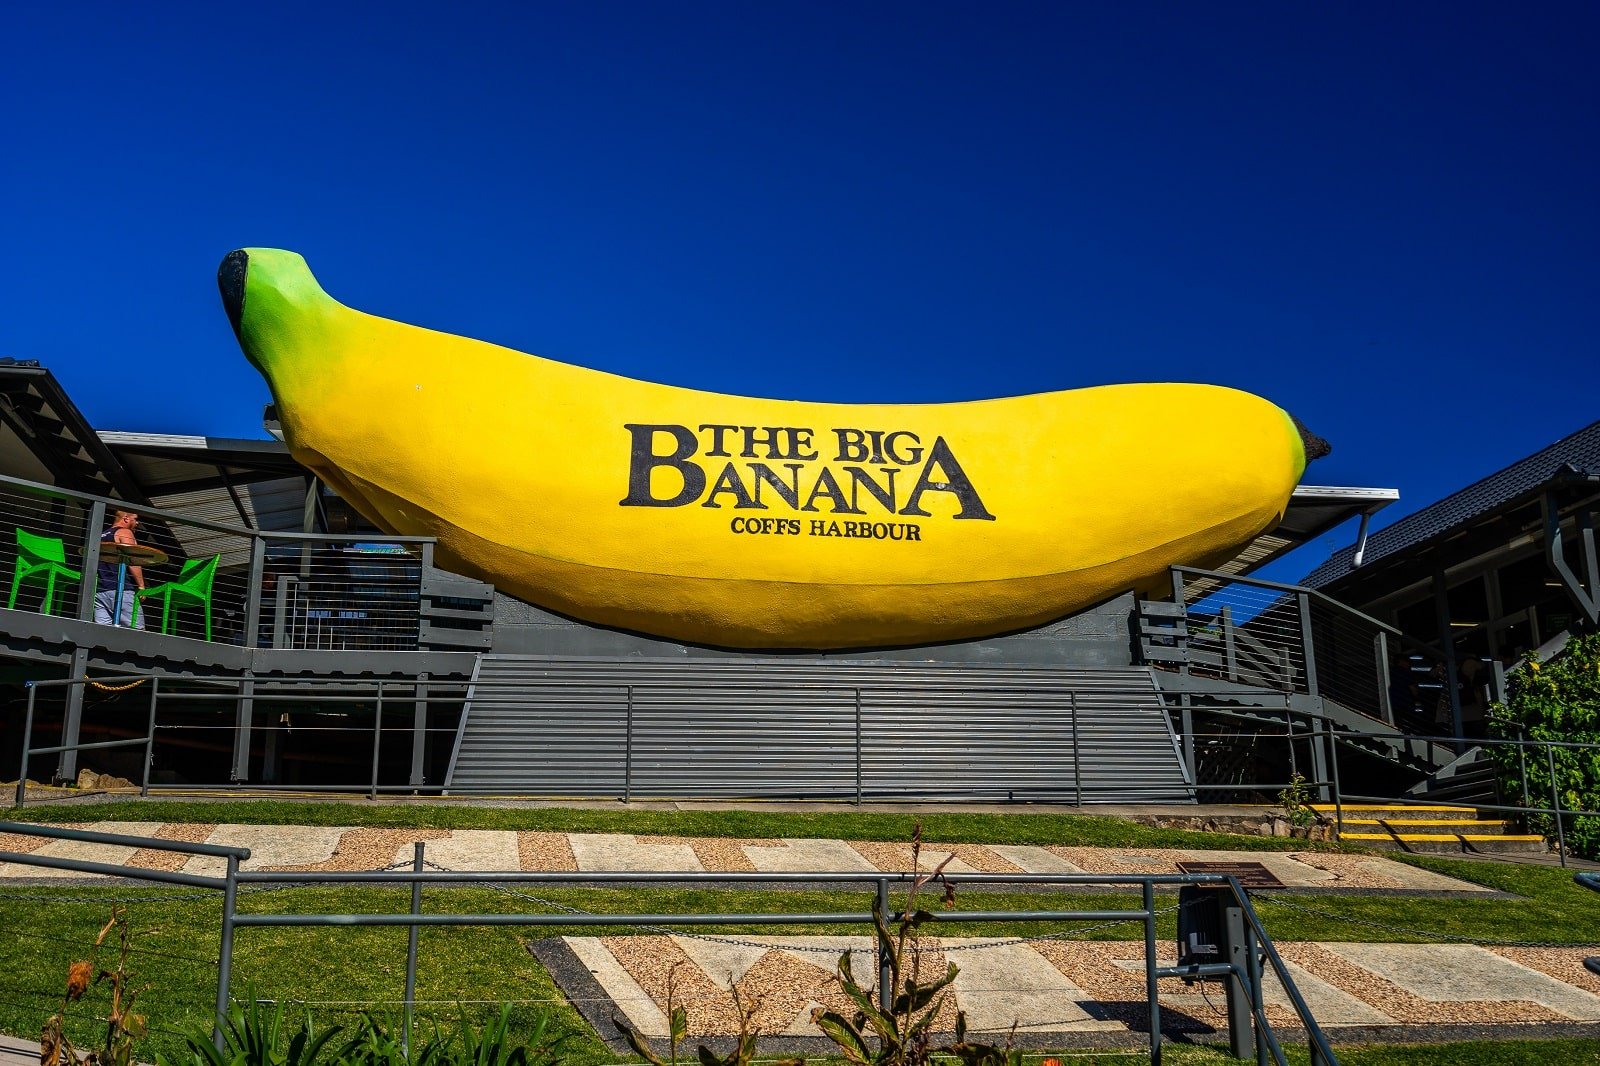 <p><span>The Big Banana in Coffs Harbour, Australia, is one of the country’s most famous “big things” and a classic example of an oversized roadside attraction. Built in 1964 to highlight the area’s banana industry, the Big Banana has evolved into a fun park with attractions like a water park, ice skating rink, and a banana-themed educational tour. It’s a fun stop for families and anyone looking to add a bit of whimsy to their road trip.</span></p> <p><b>Insider’s Tip: </b><span>Don’t miss the banana-themed souvenirs at the gift shop.</span></p> <p><b>When To Travel: </b><span>Enjoyable year-round, but the summer months offer more activities.</span></p> <p><b>How To Get There: </b><span>Located on the Pacific Highway just north of Coffs Harbour.</span></p>